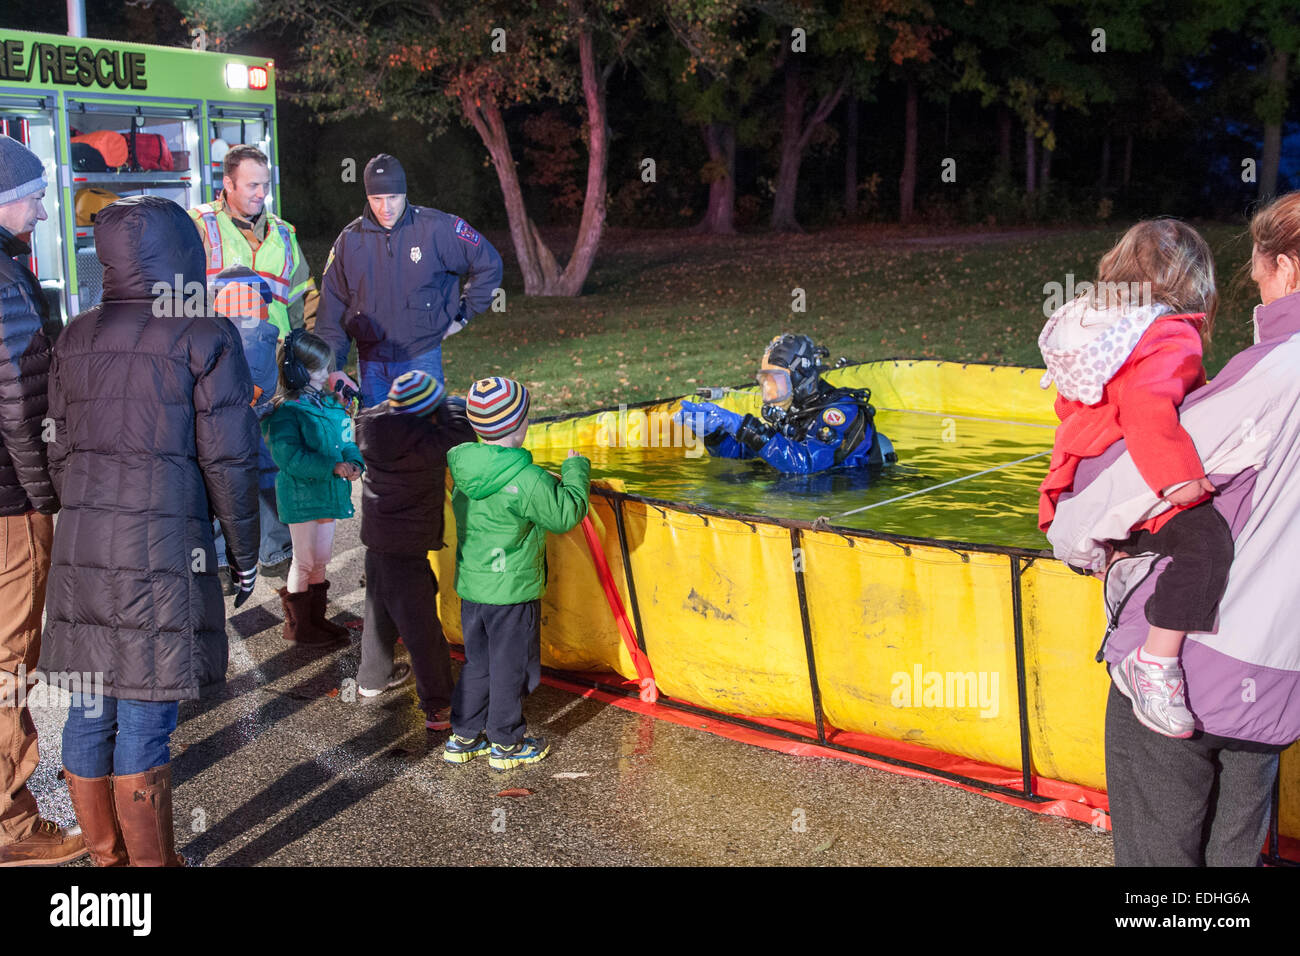 Young children watching a scubadiver in a tank at National Night Out in Richfield WI Stock Photo